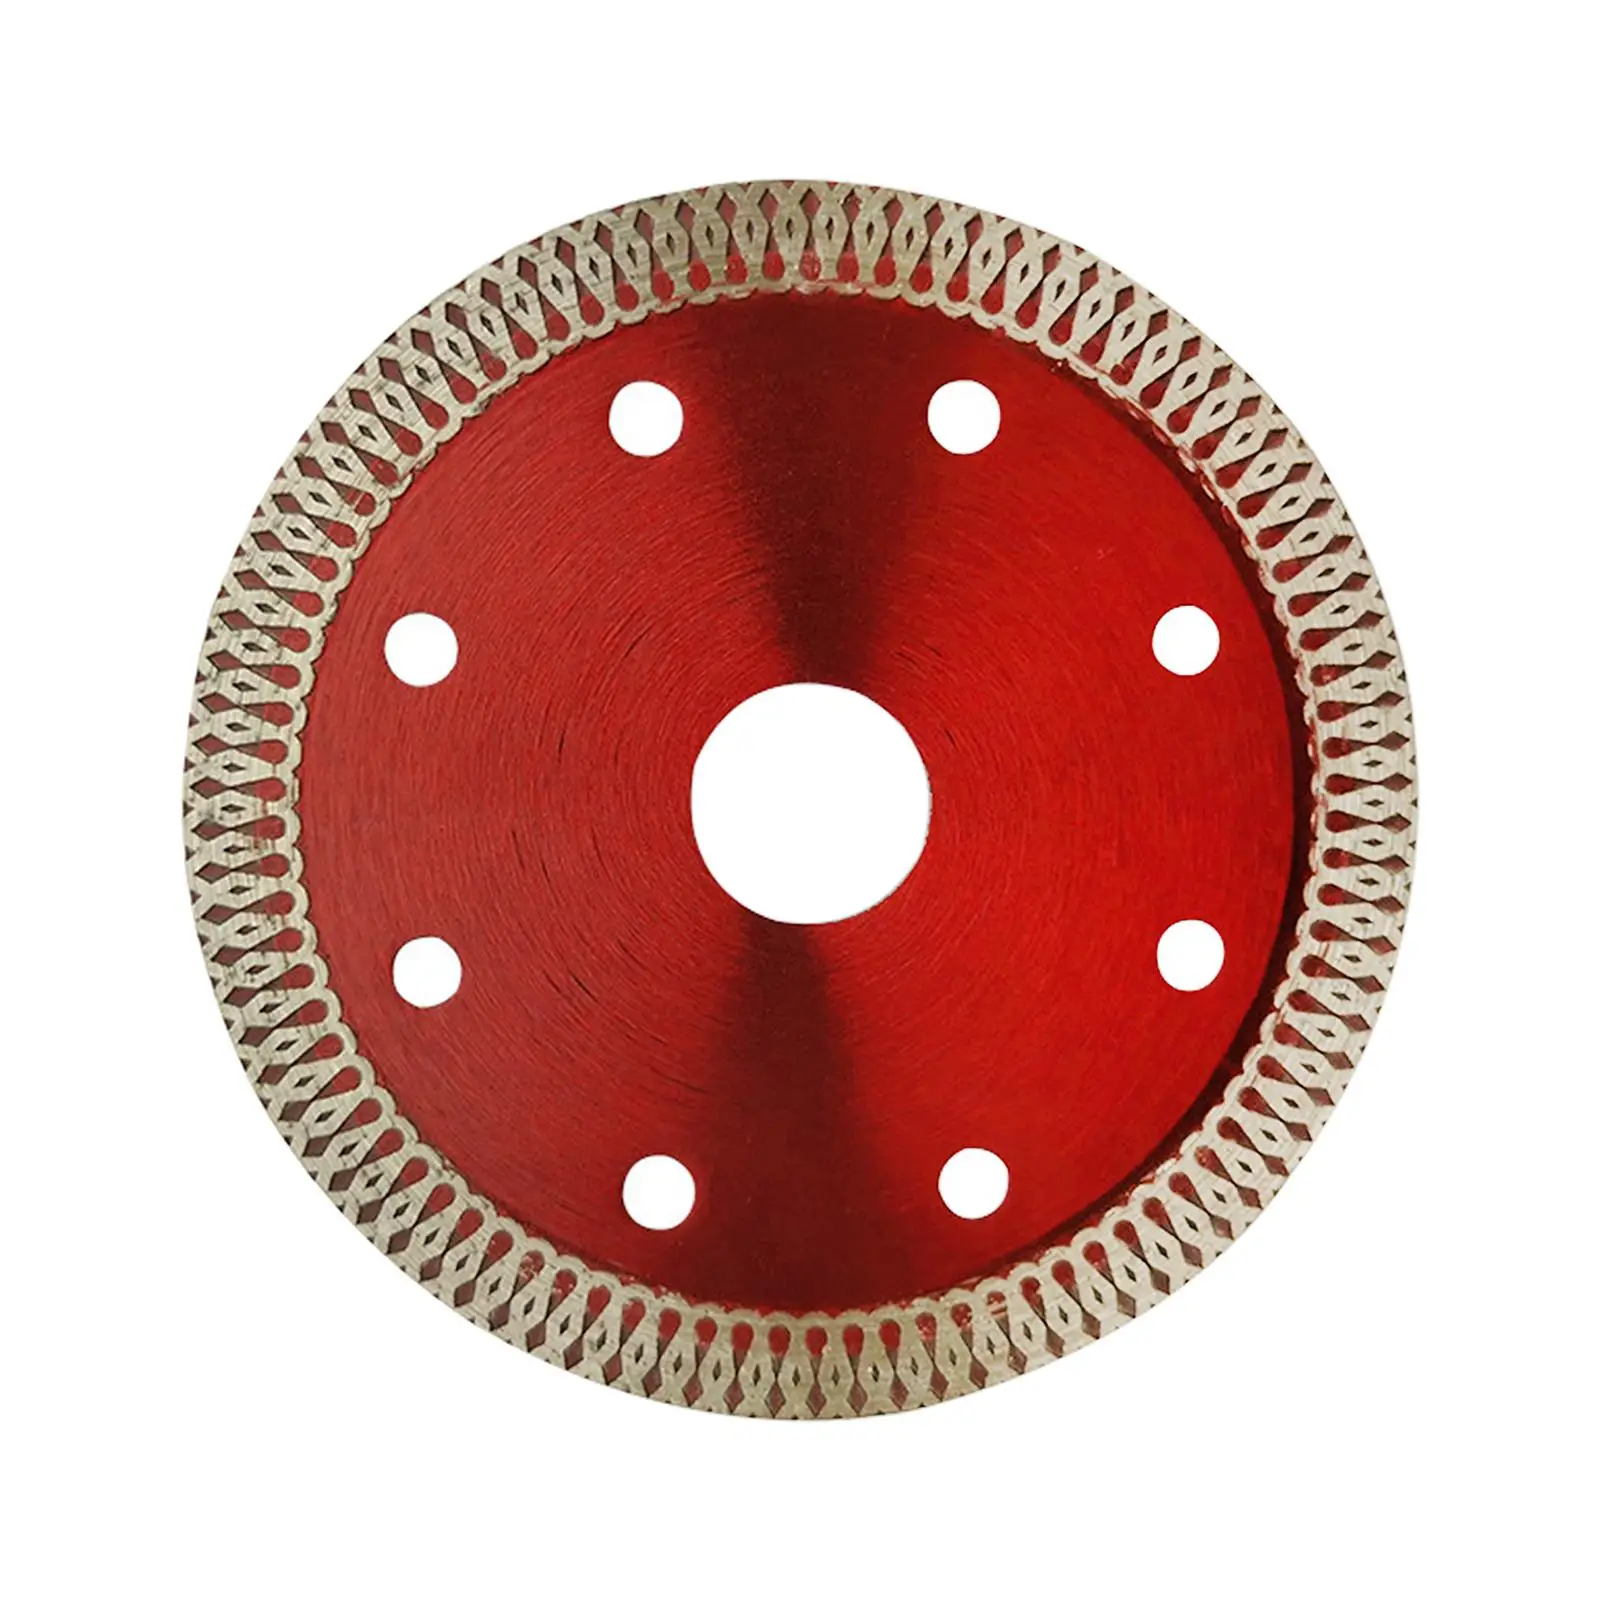 

Saw Dry and Wet Diamond Porcelain Saw Cutting Tools Cutting Disc Wheels High Hardness for Marbles Granite Ceramic Tile Masonry